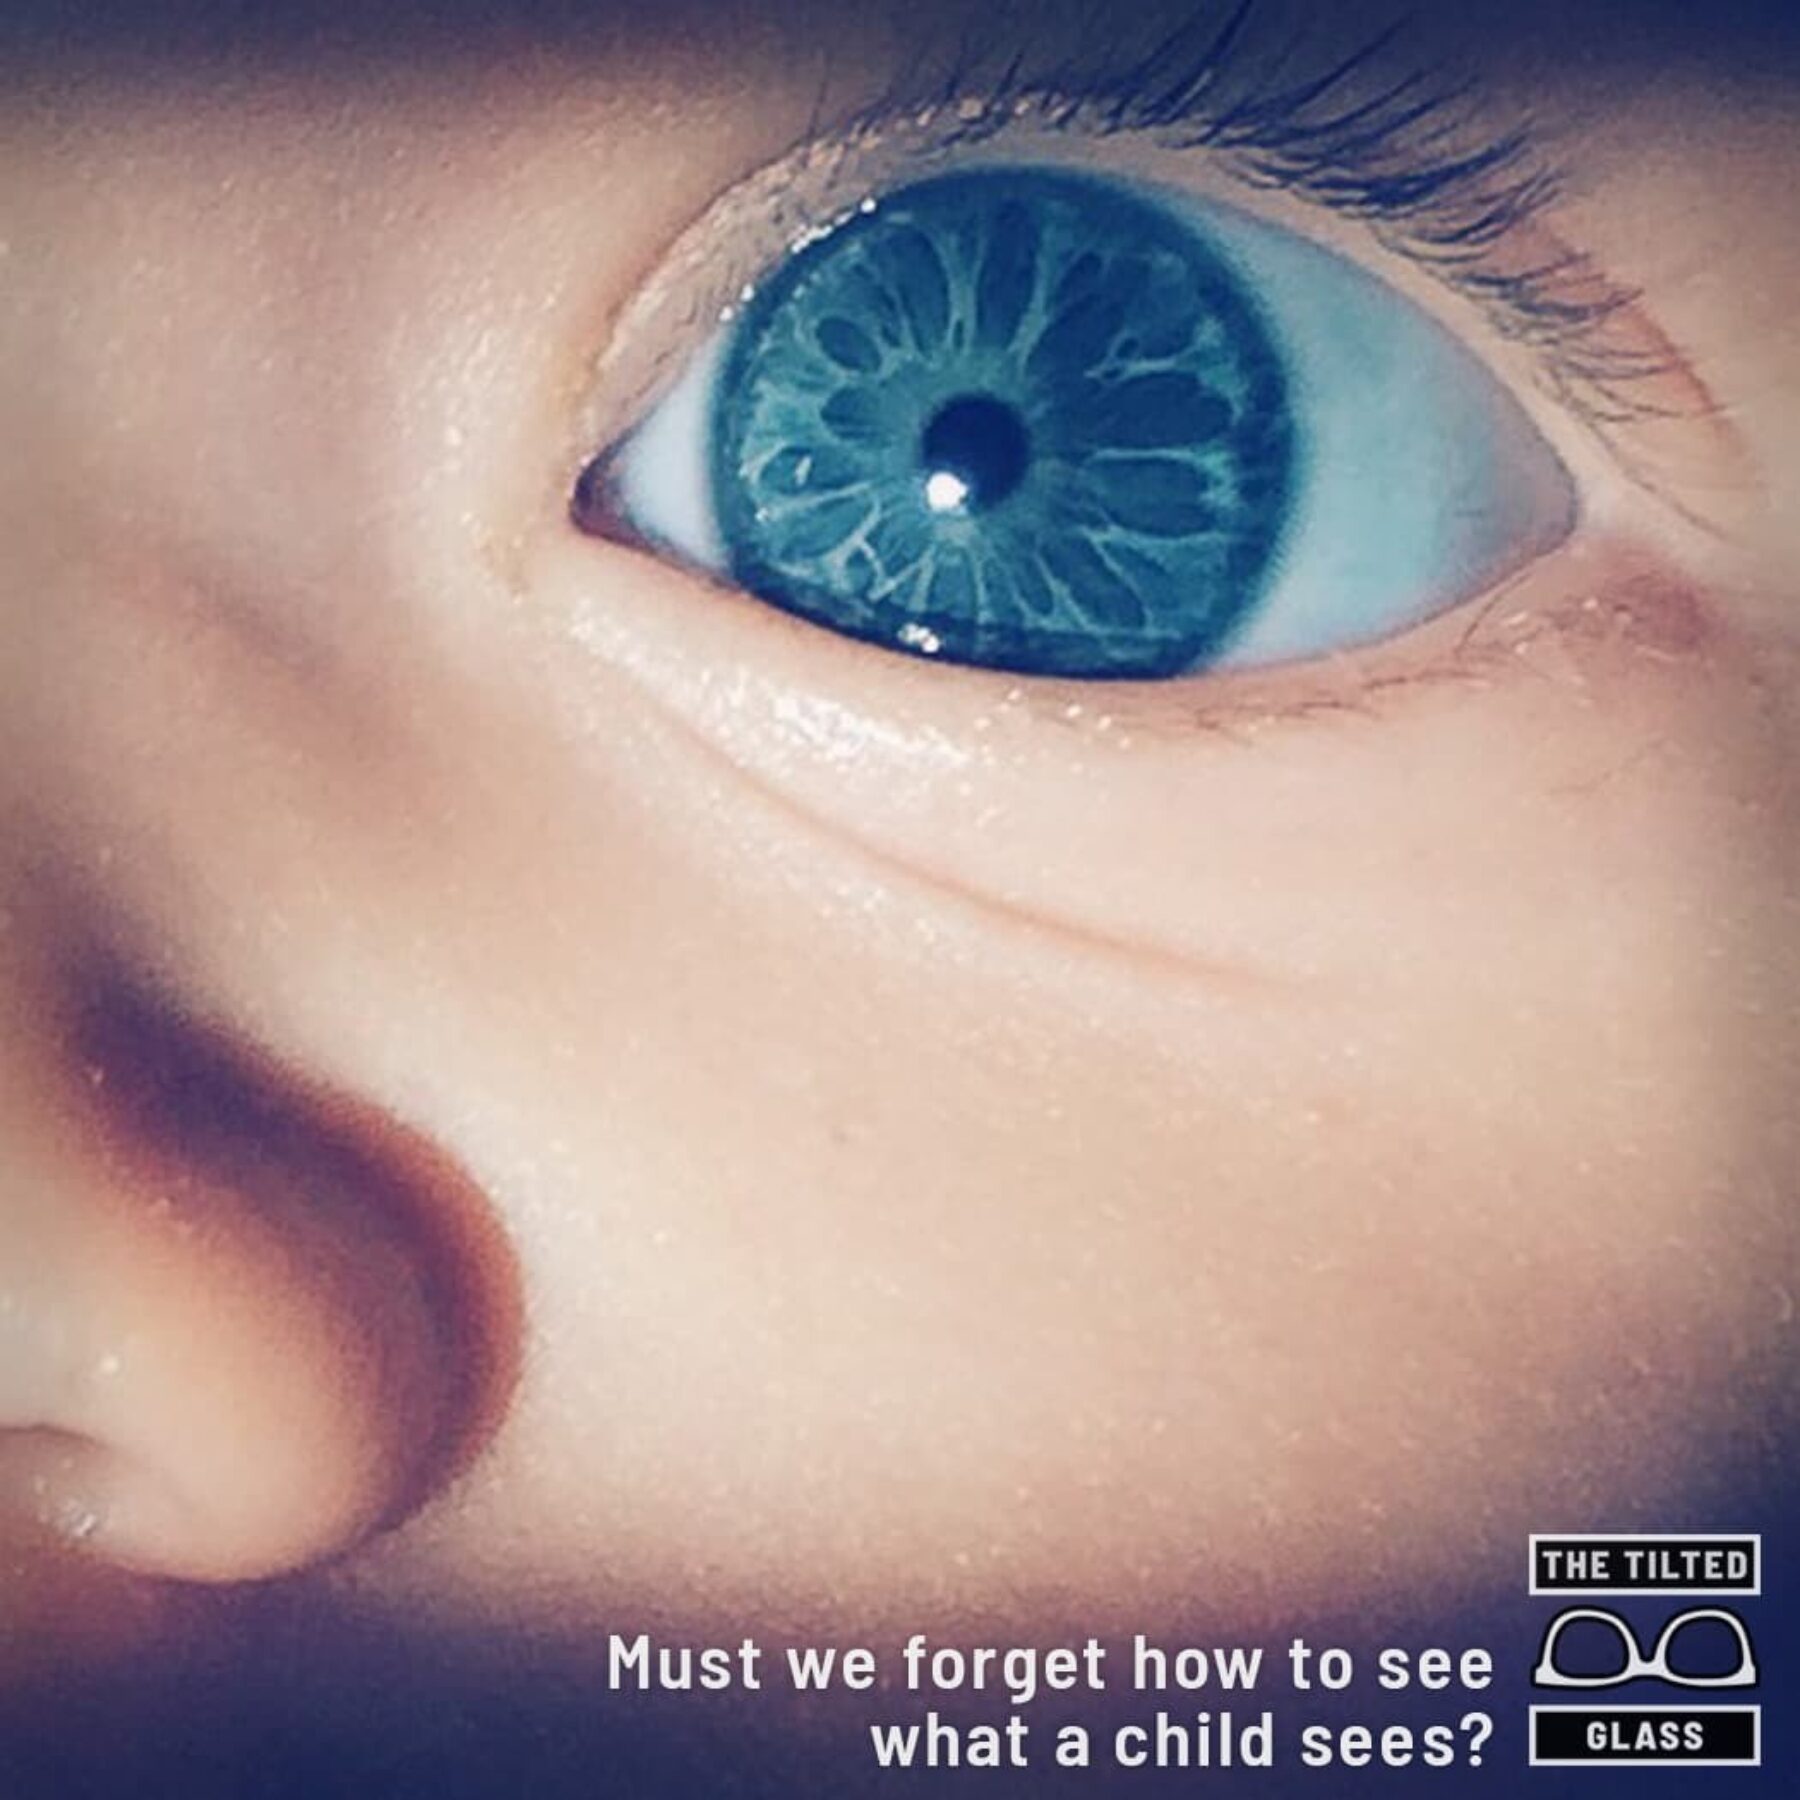 Must we forget how to see what a child sees?